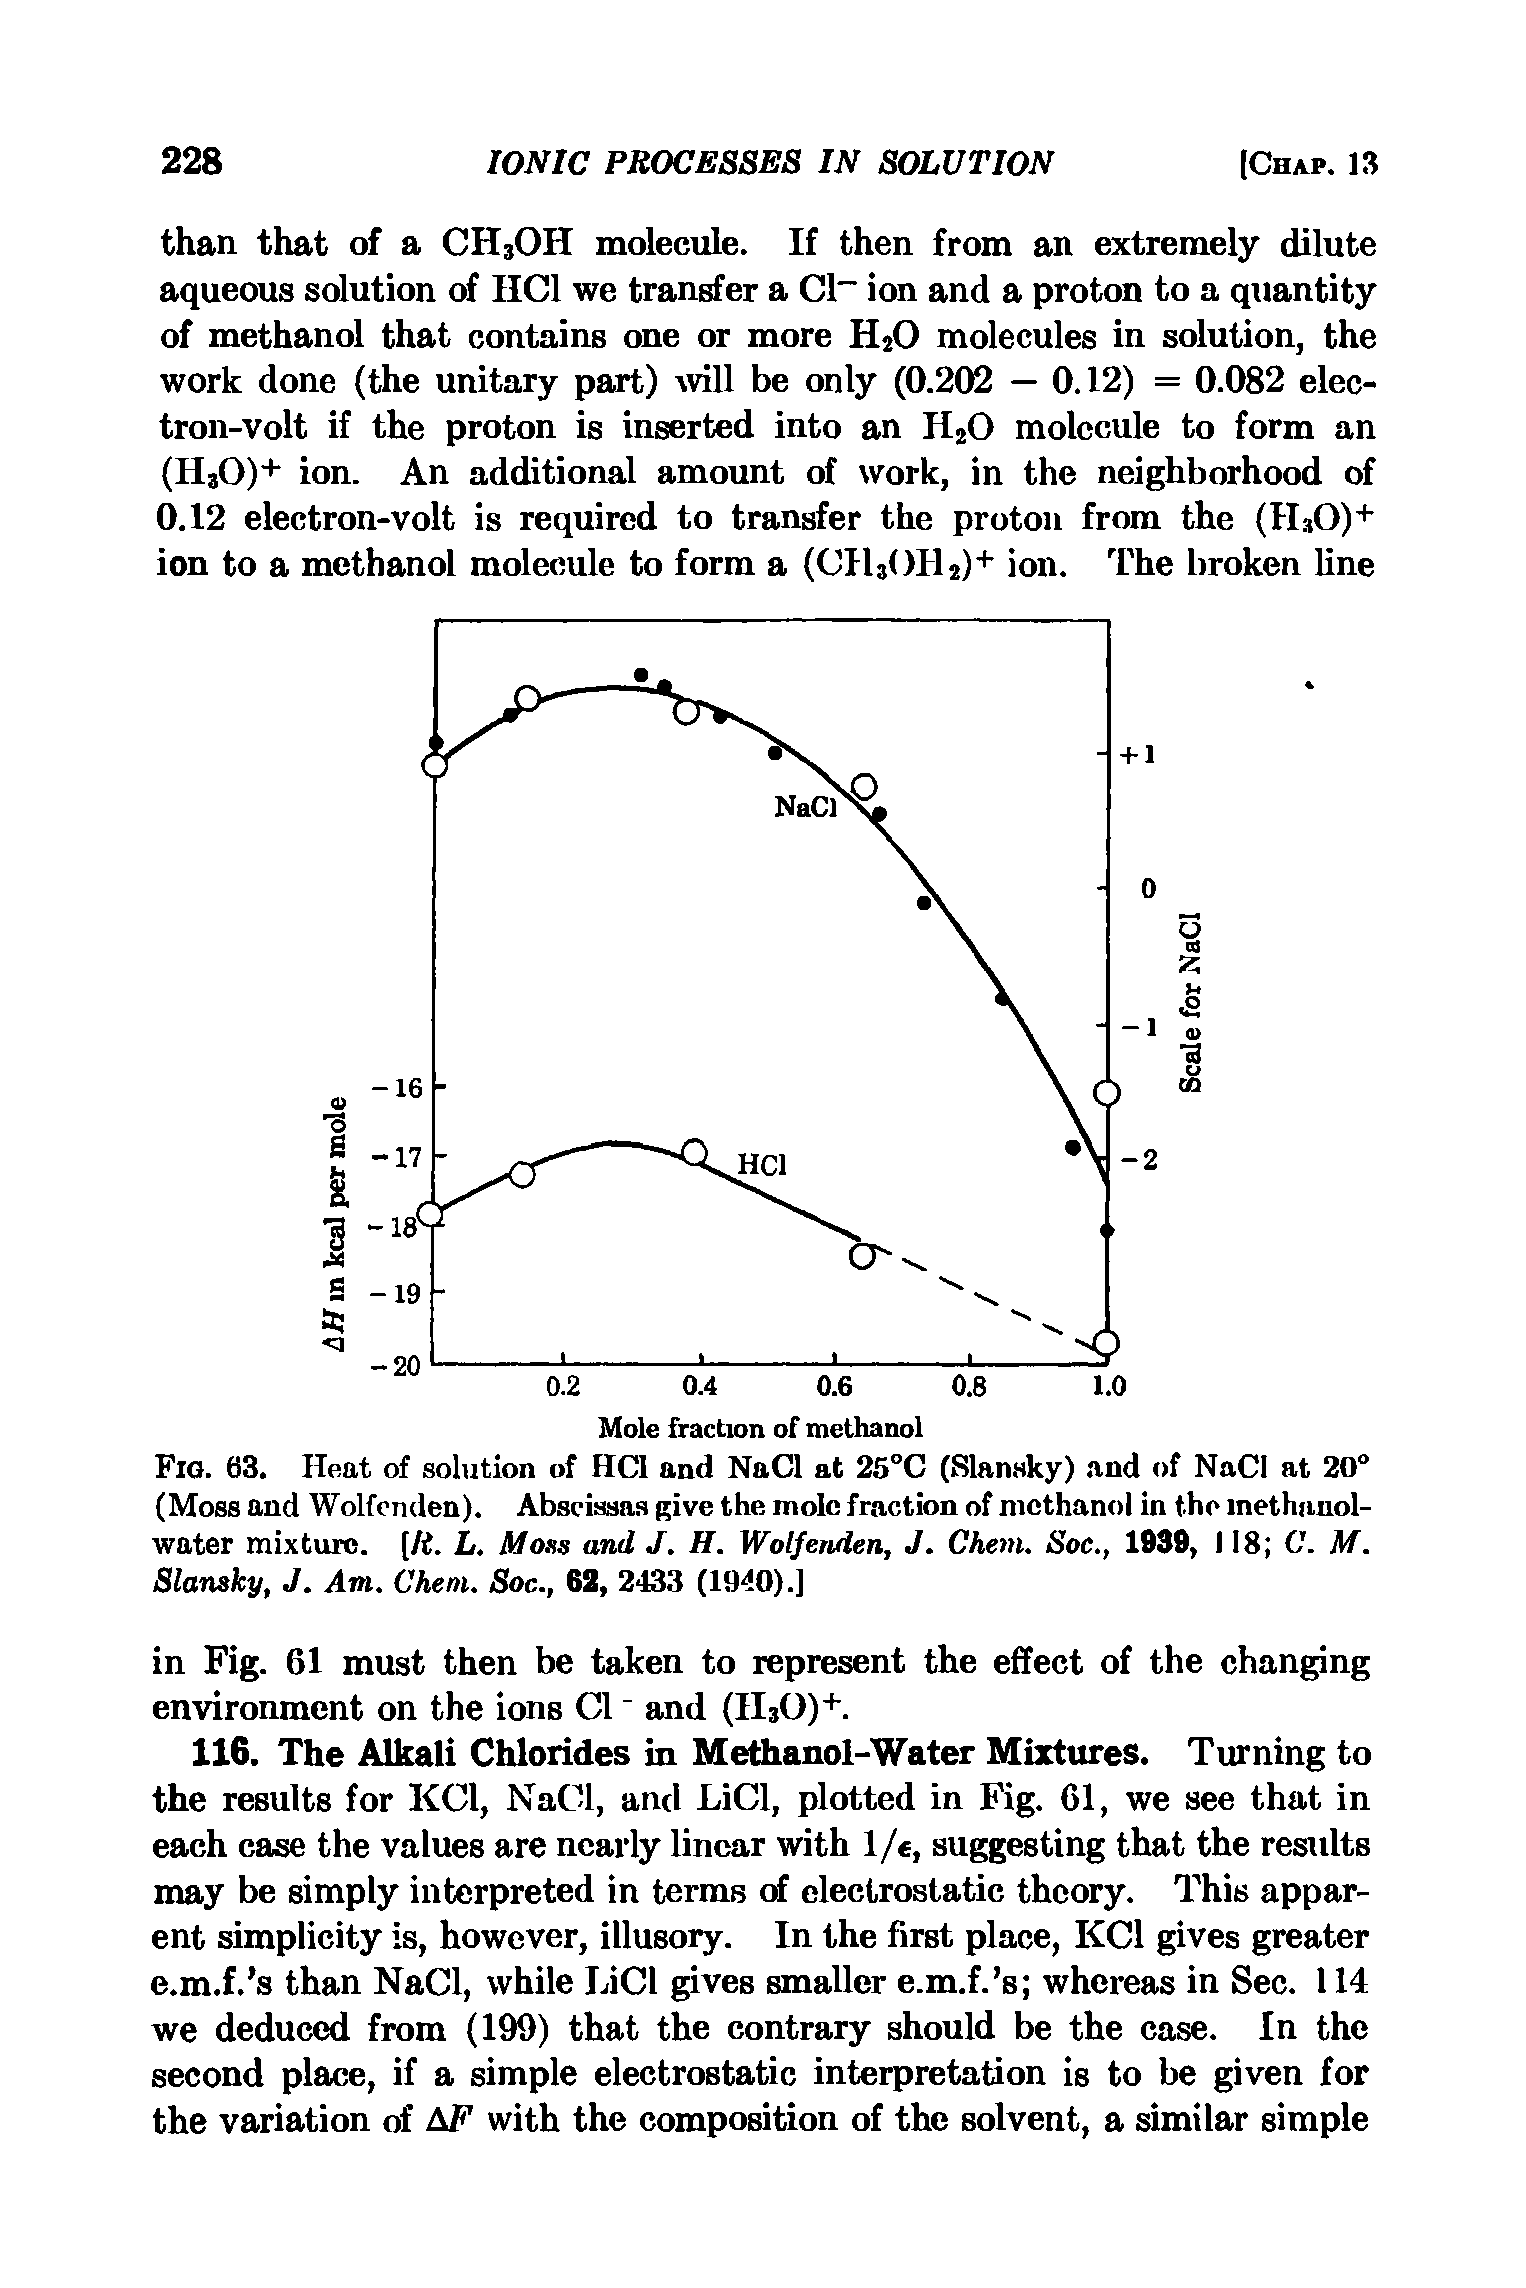 Fig. 63. Heat of solution of HC1 and NaCl at 25°C (Slansky) and of NaCI at 20° (Moss and Wolfenden). Abscissas give the mole fraction of methanol in the inethanol-water mixture. [It. L. Moss and J. H. Wolfenden, J. Chem. Soc., 1939, 118 C. M. Slansky, J. Am. Chem. Soc., 62, 2433 (1940).]...